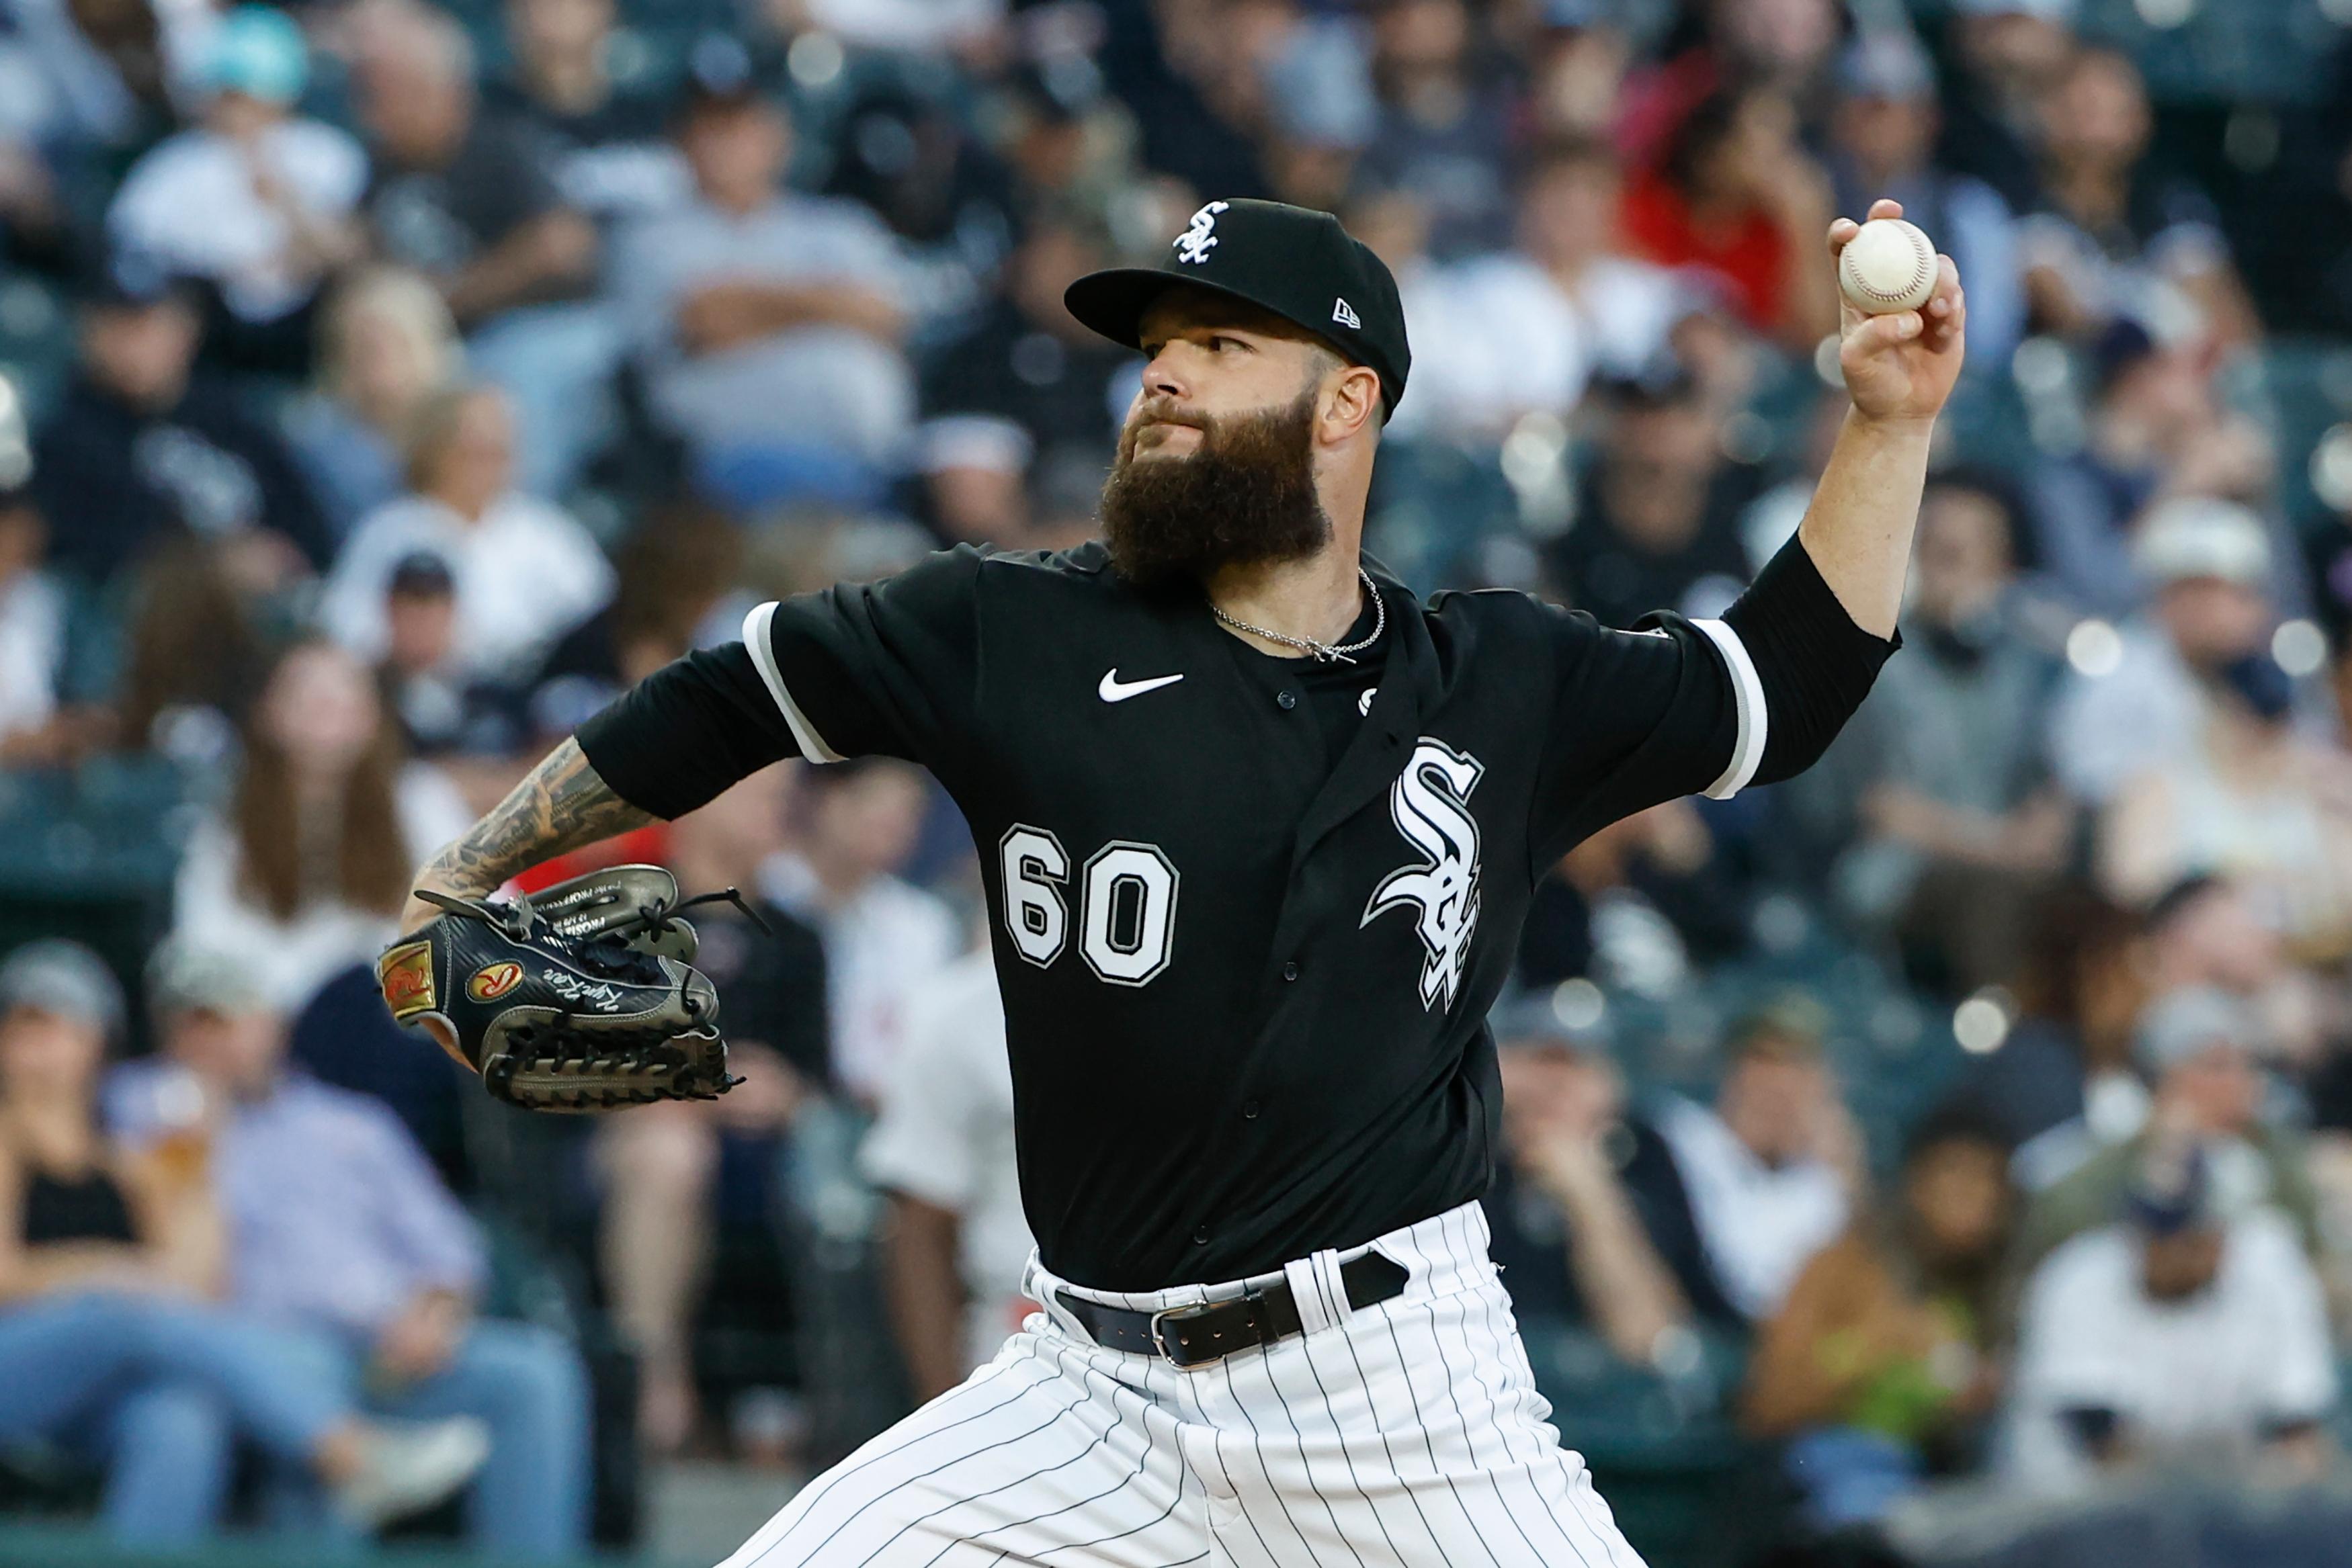 Chicago White Sox starting pitcher Dallas Keuchel (60) delivers against the Boston Red Sox during the second inning at Guaranteed Rate Field. / Kamil Krzaczynski-USA TODAY Sports